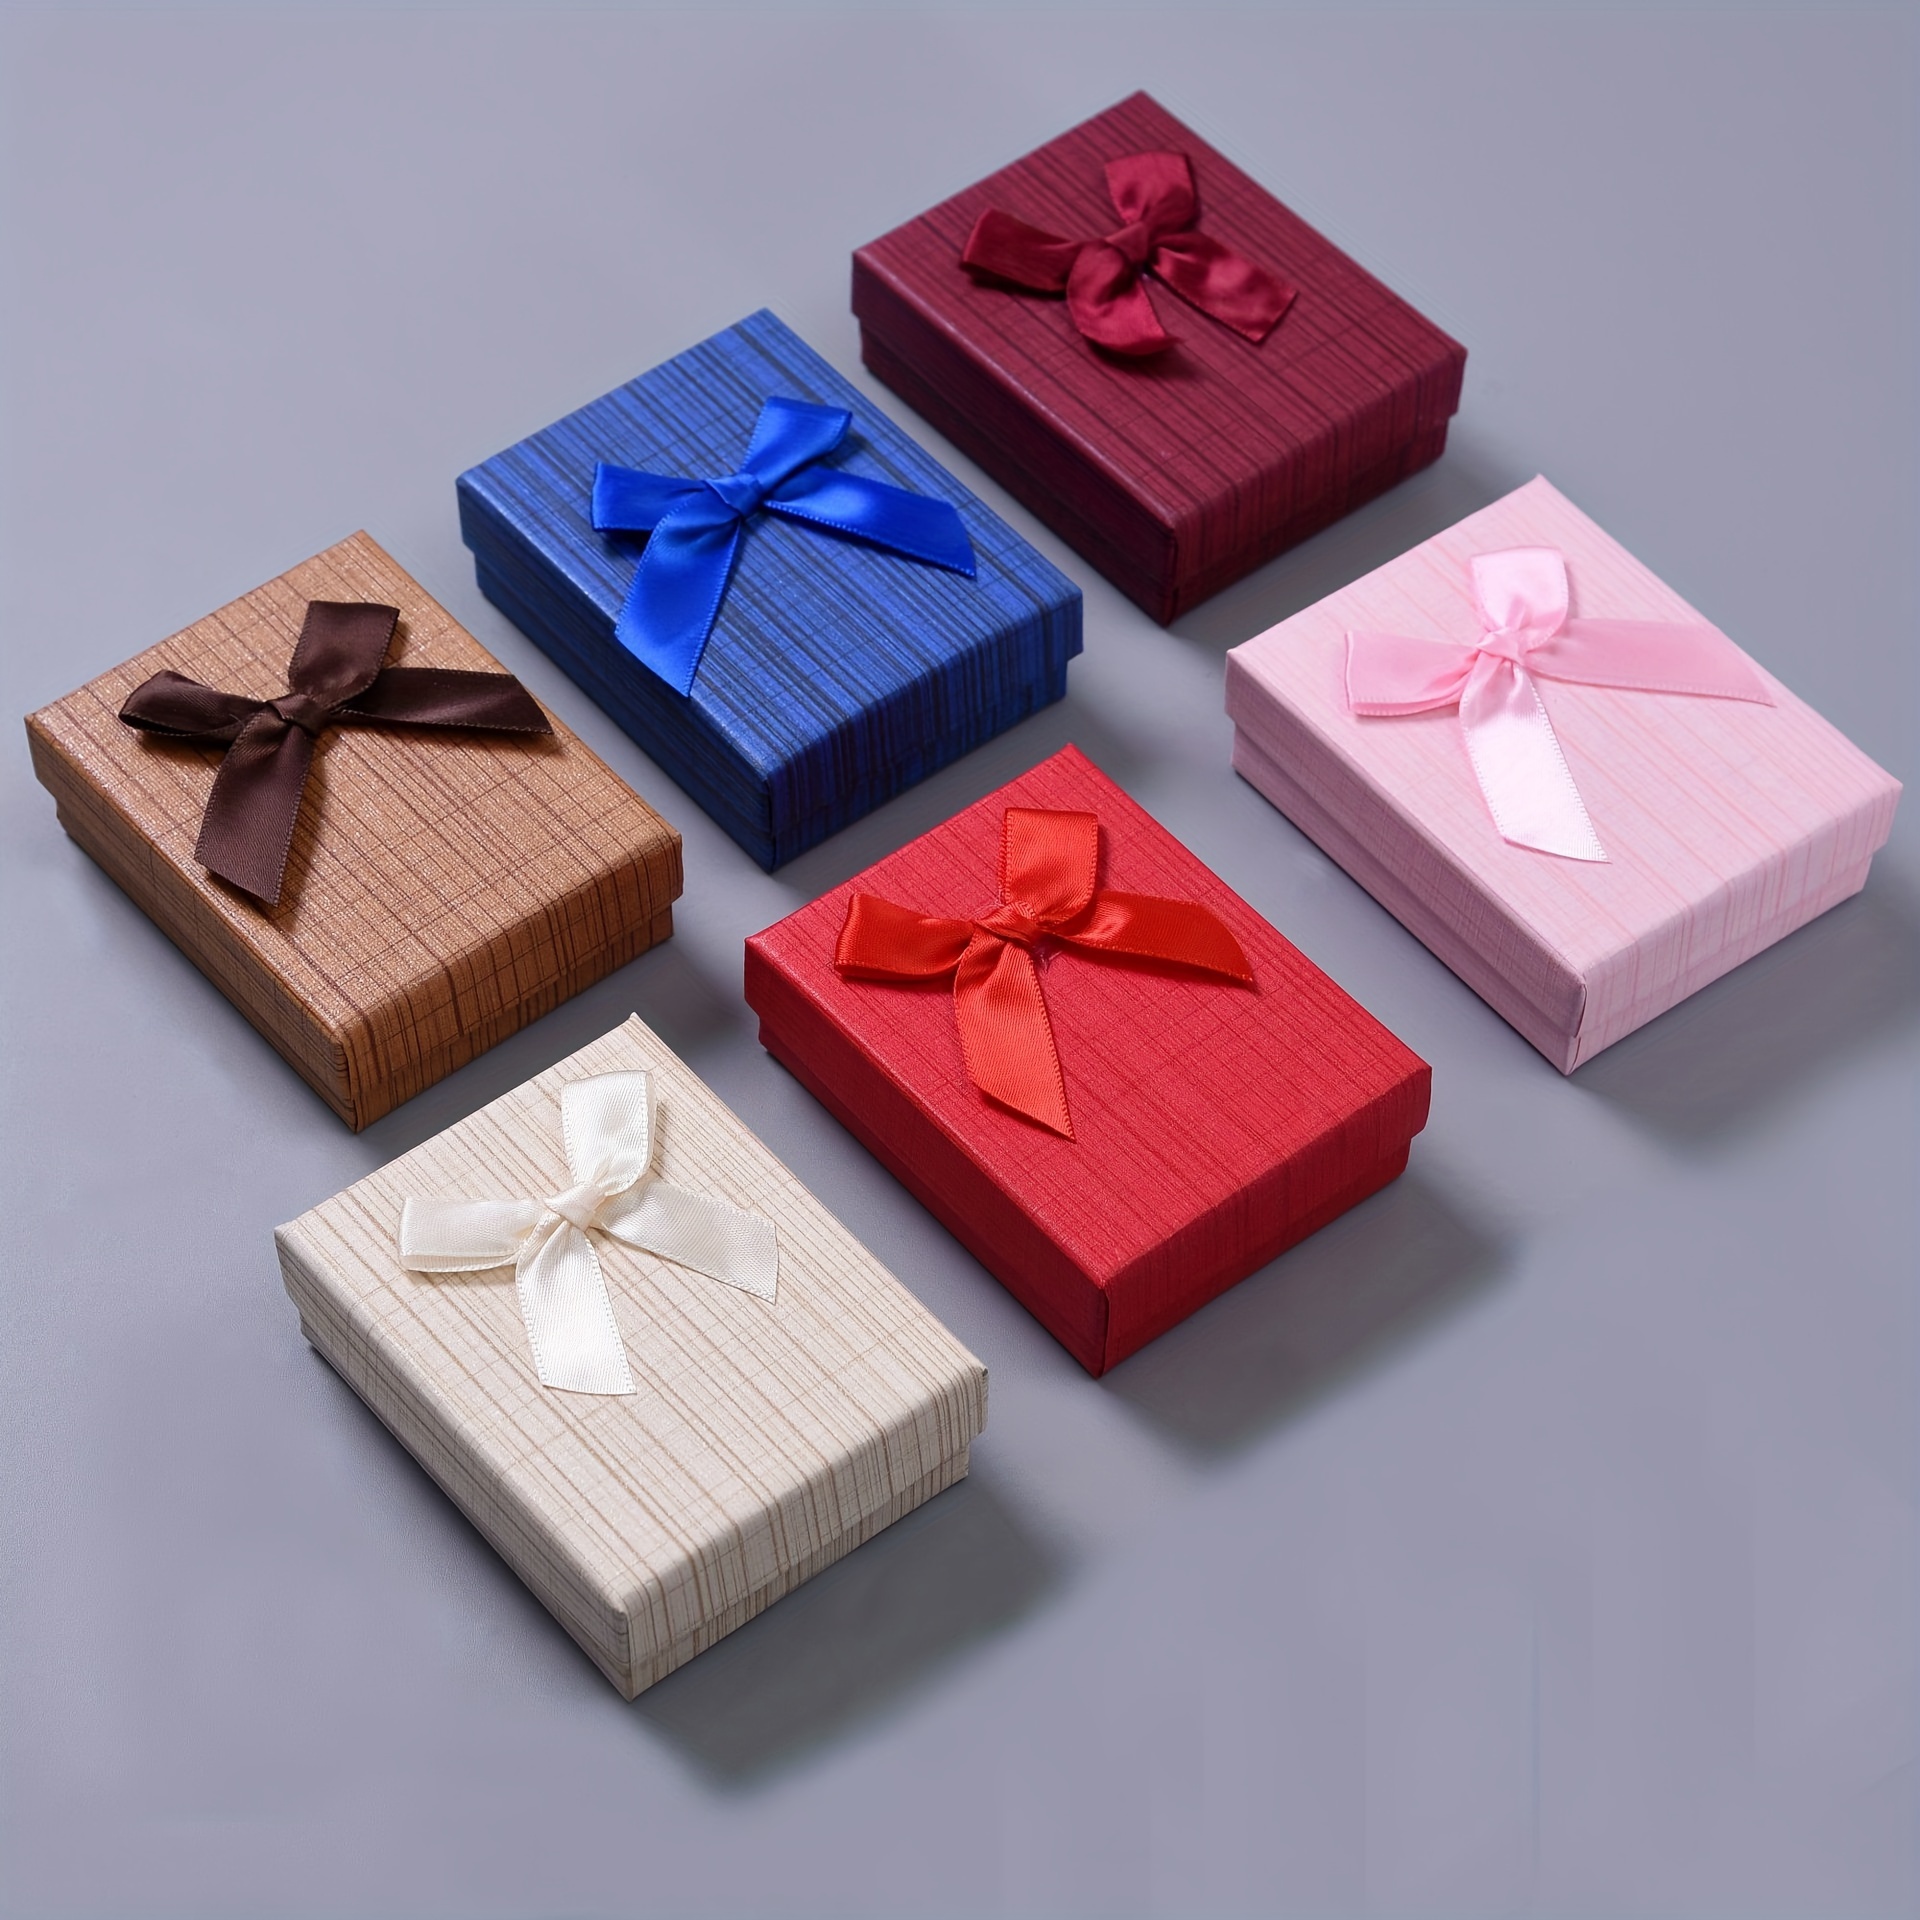 12pcs/pack, New Jewelry Box Packaging Jewelry Box Ring Necklace Ear  Jewelry, Cheapest Items Available, , Small Business Supplies, Packaging  Box, Weddi